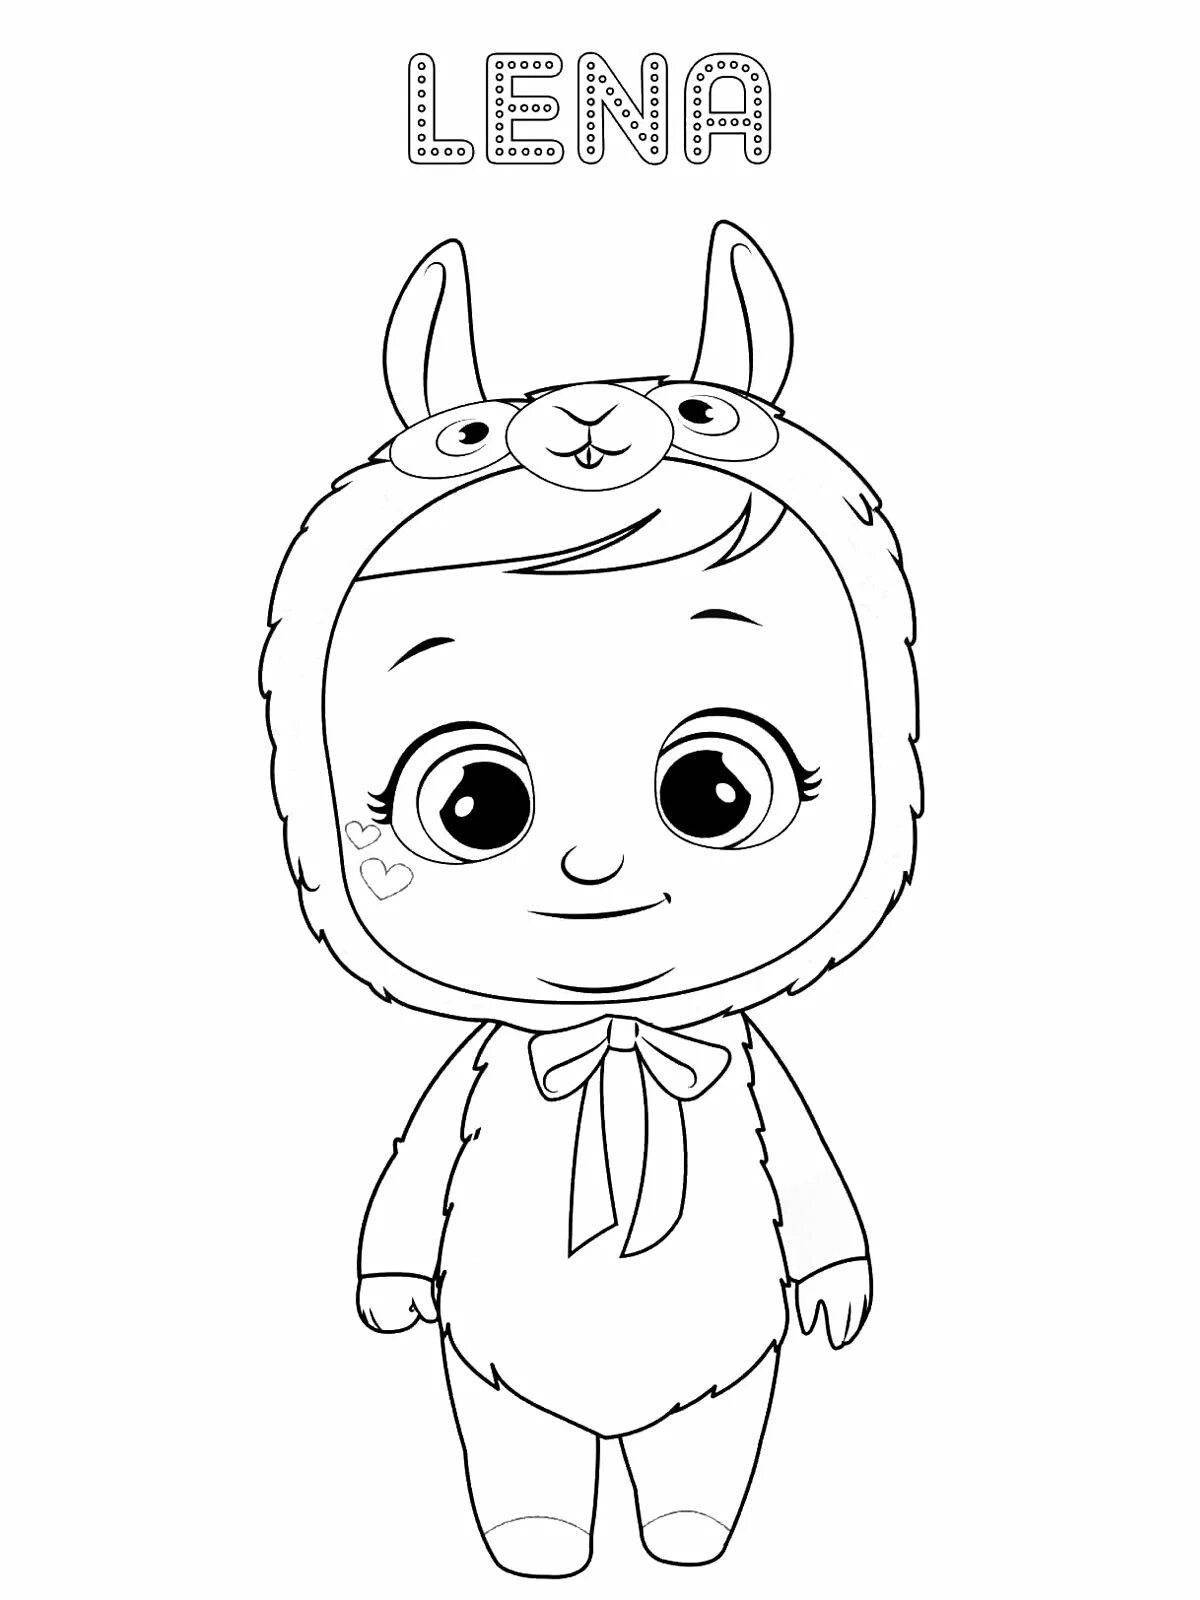 Colorful kreis baby coloring page